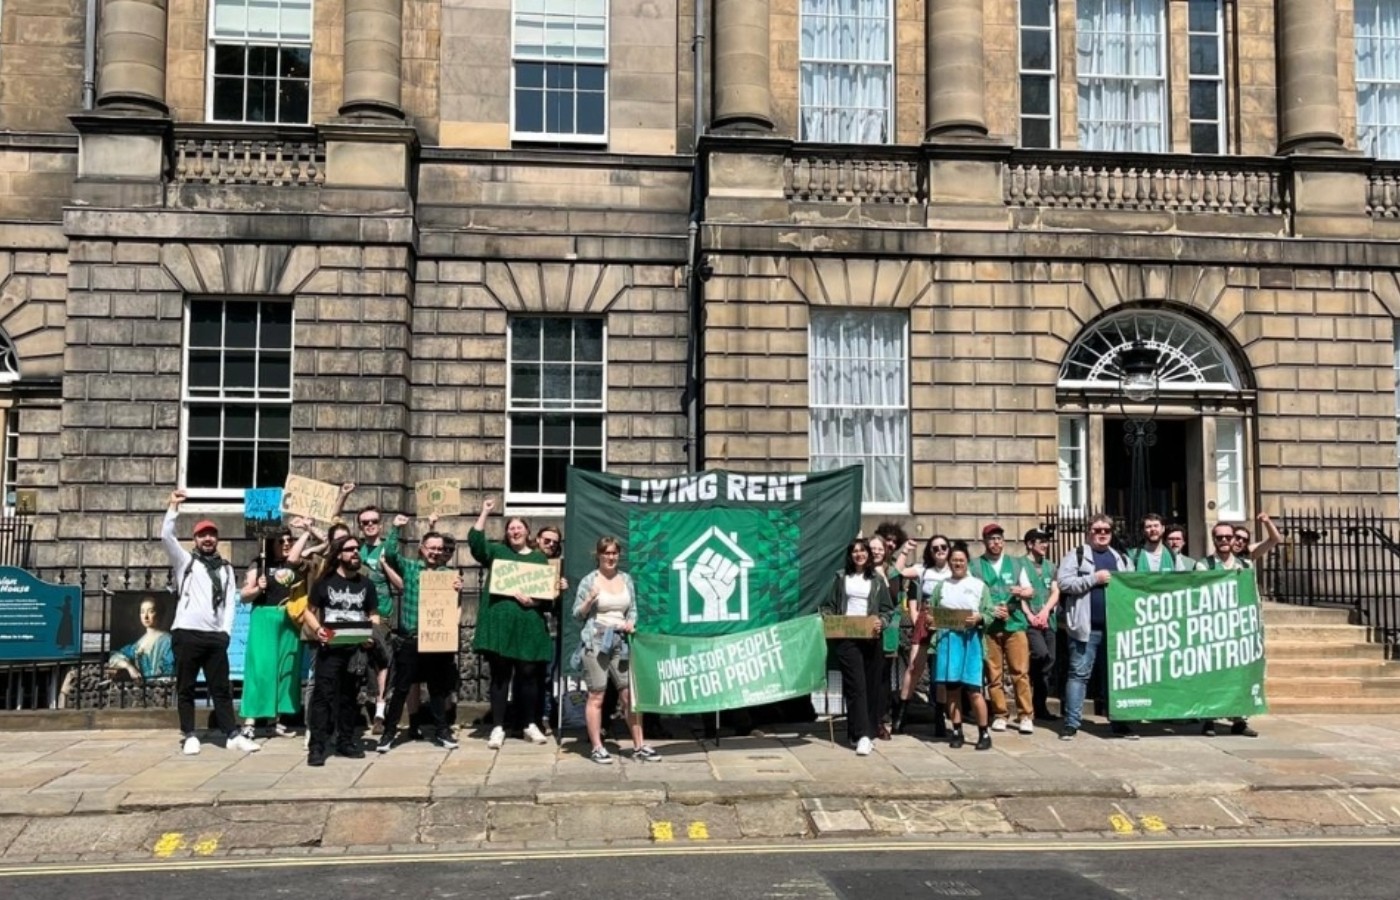 Protesters outside Bute House calling for rent controls (Living Rent/PA Wire). 